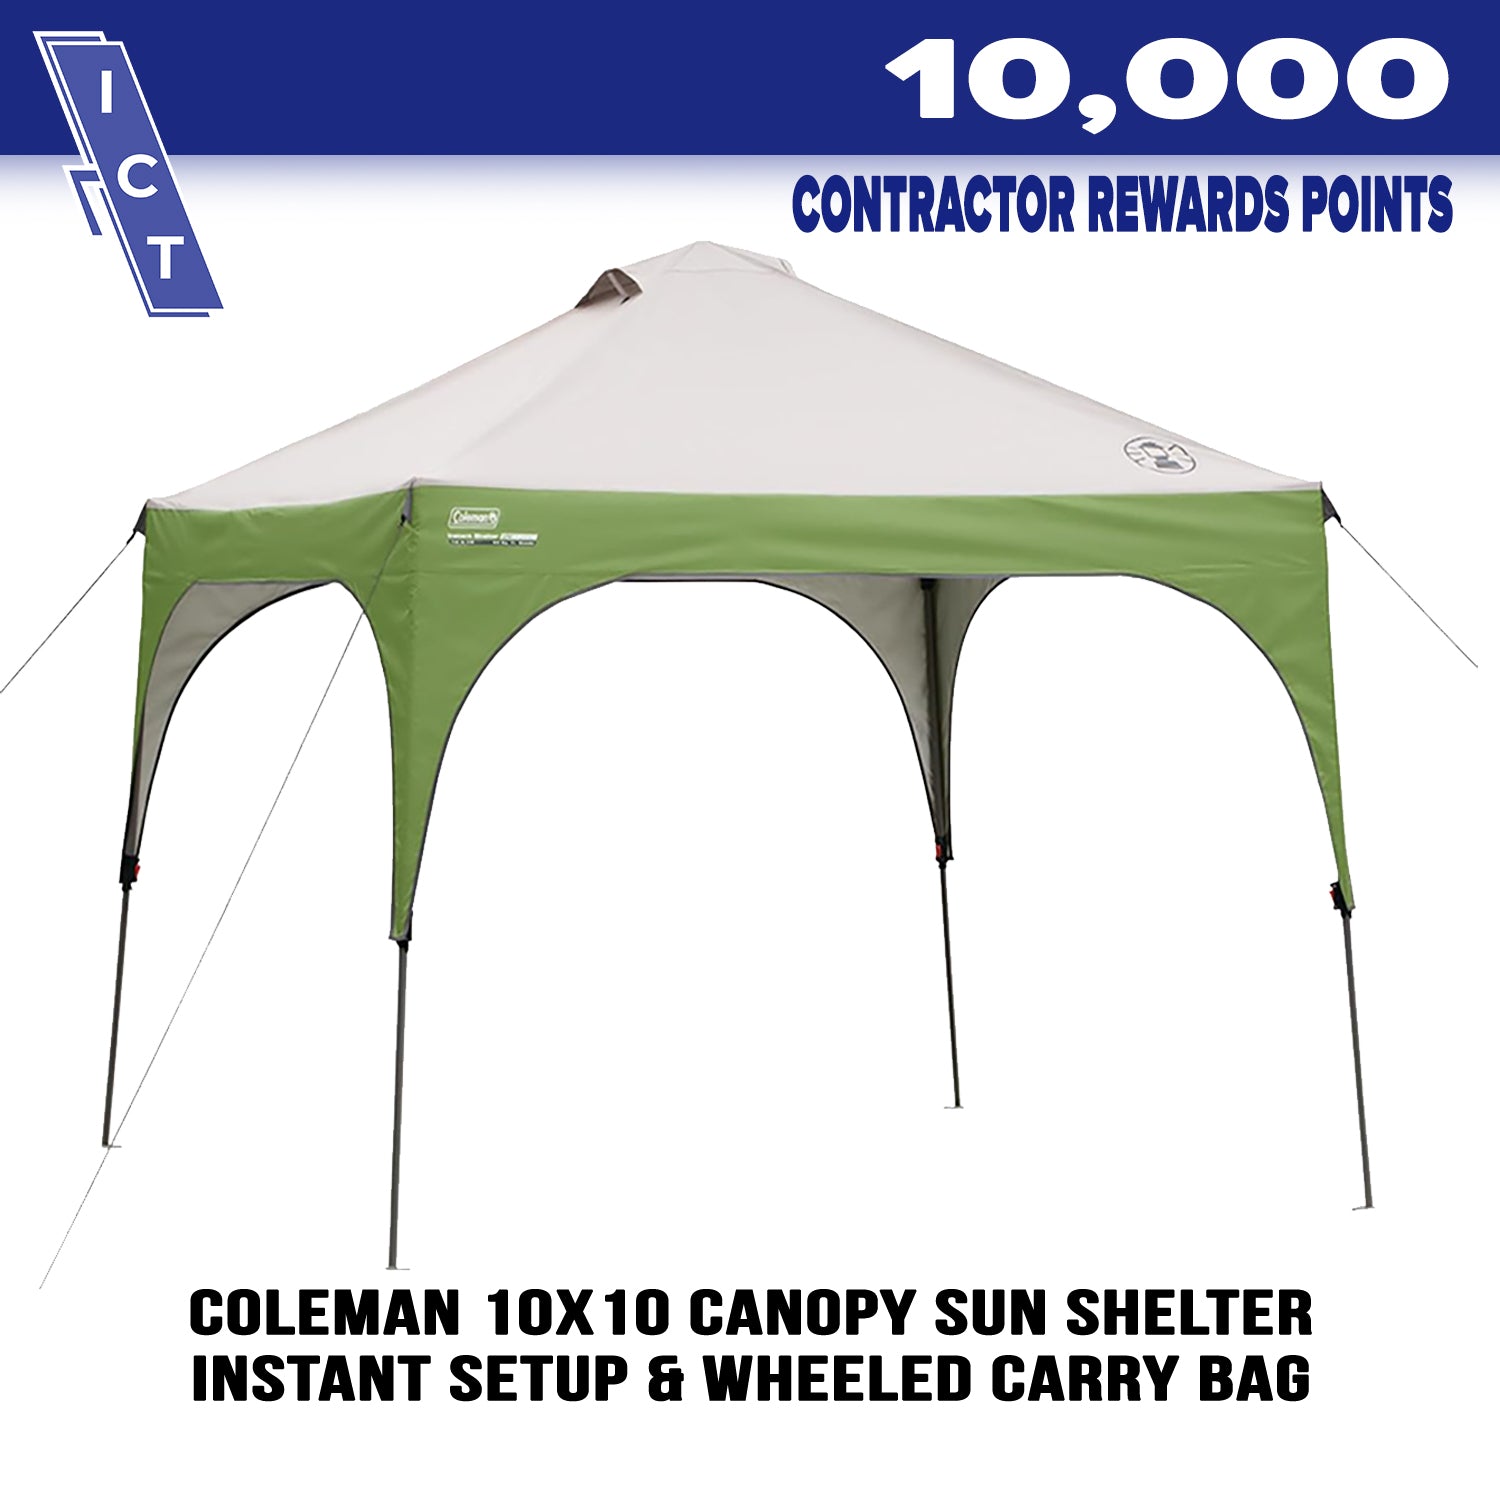 Coleman 10'x10' canopy prize for 10000 points